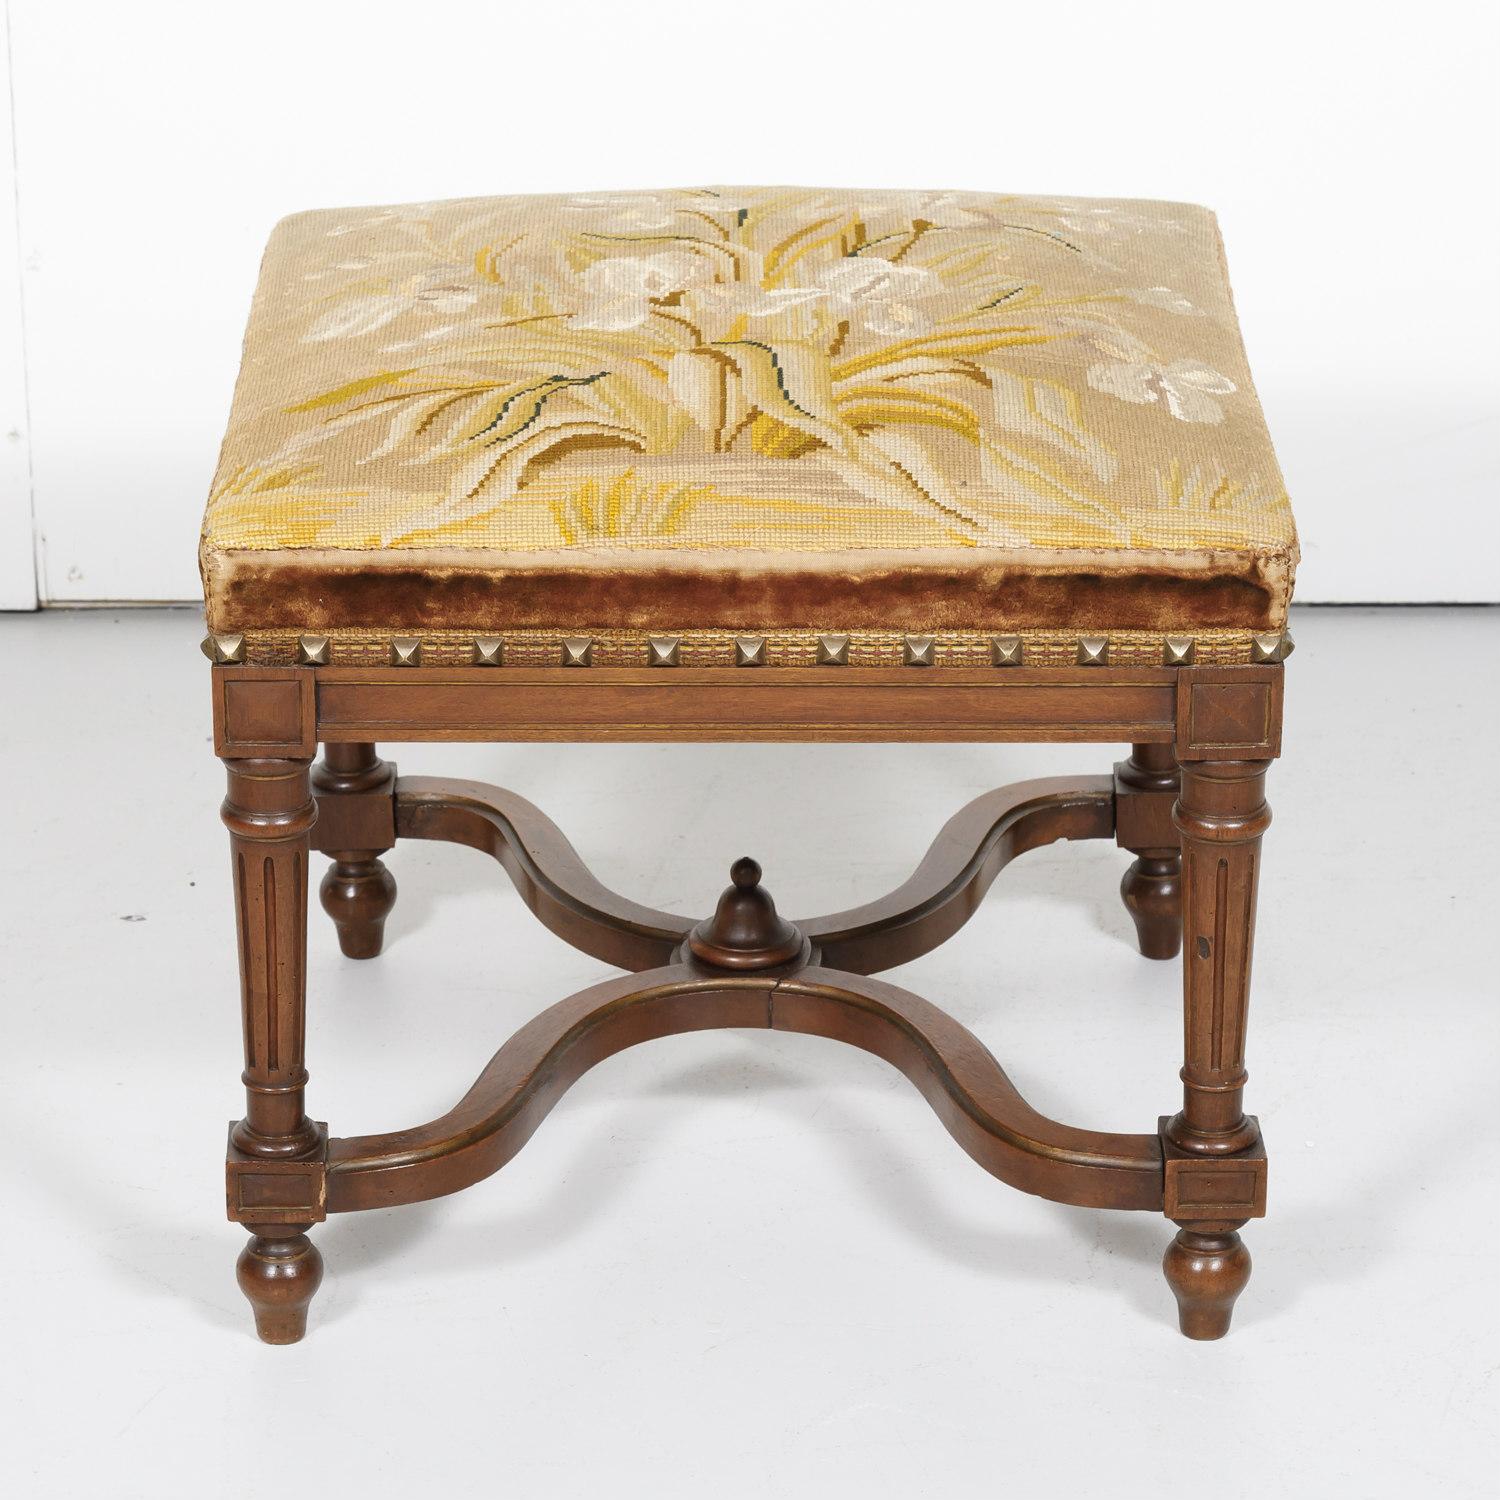 Late 19th Century 19th Century French Napoleon III Period Walnut Needlework Footstool For Sale